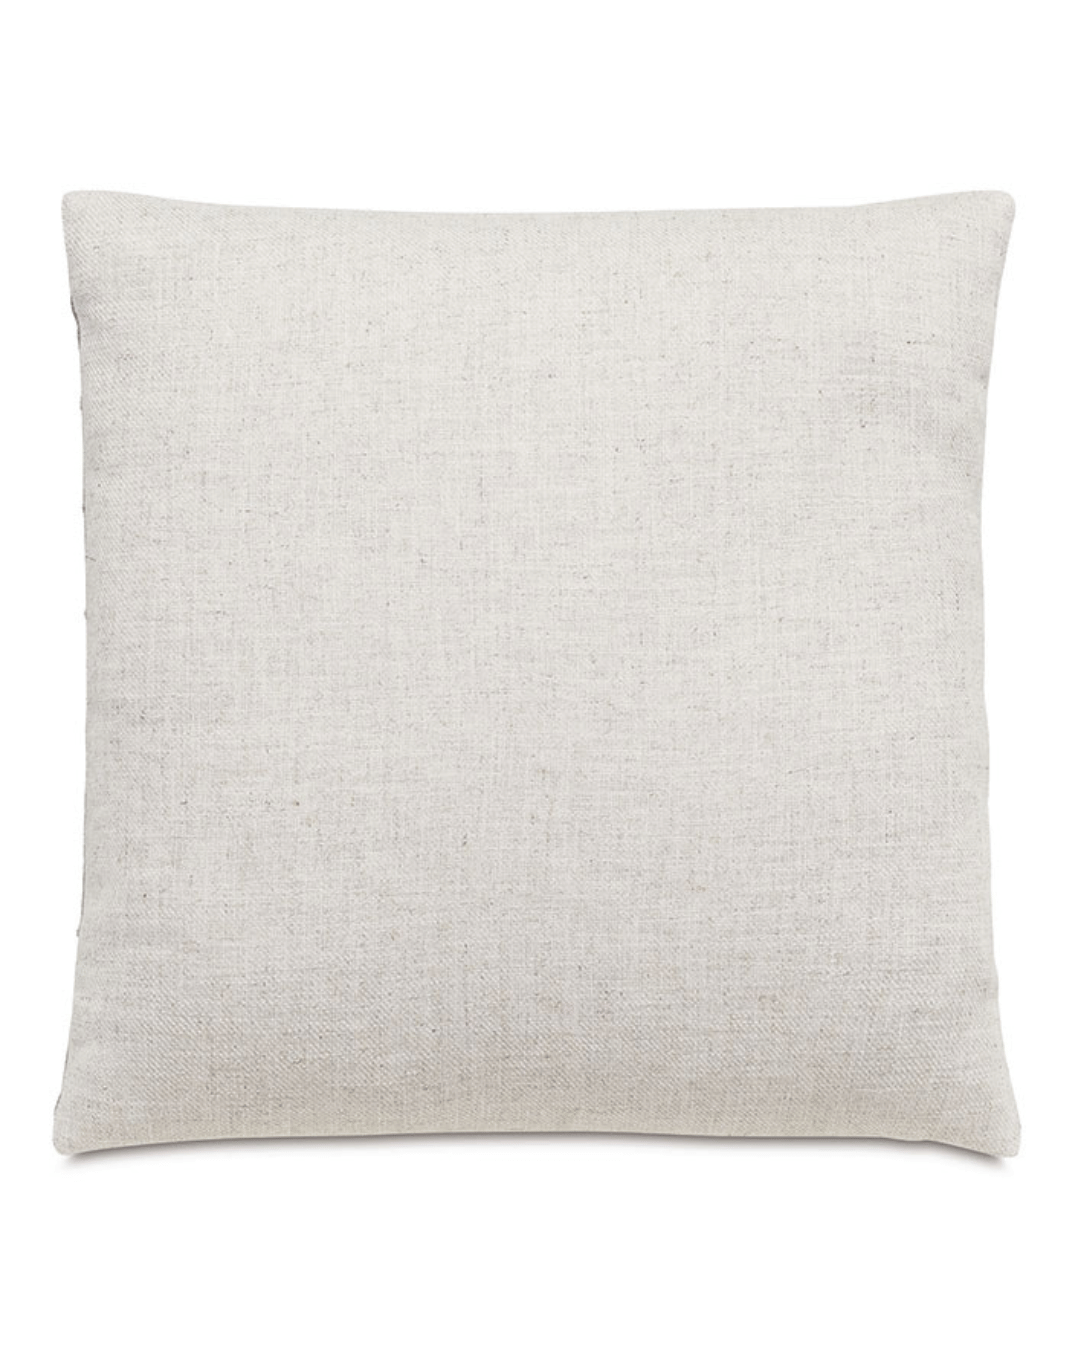 A plain light beige Clear Dotted Pillow made of textured fabric, displayed against a white background in a Scottsdale Arizona bungalow by Eastern Accents.